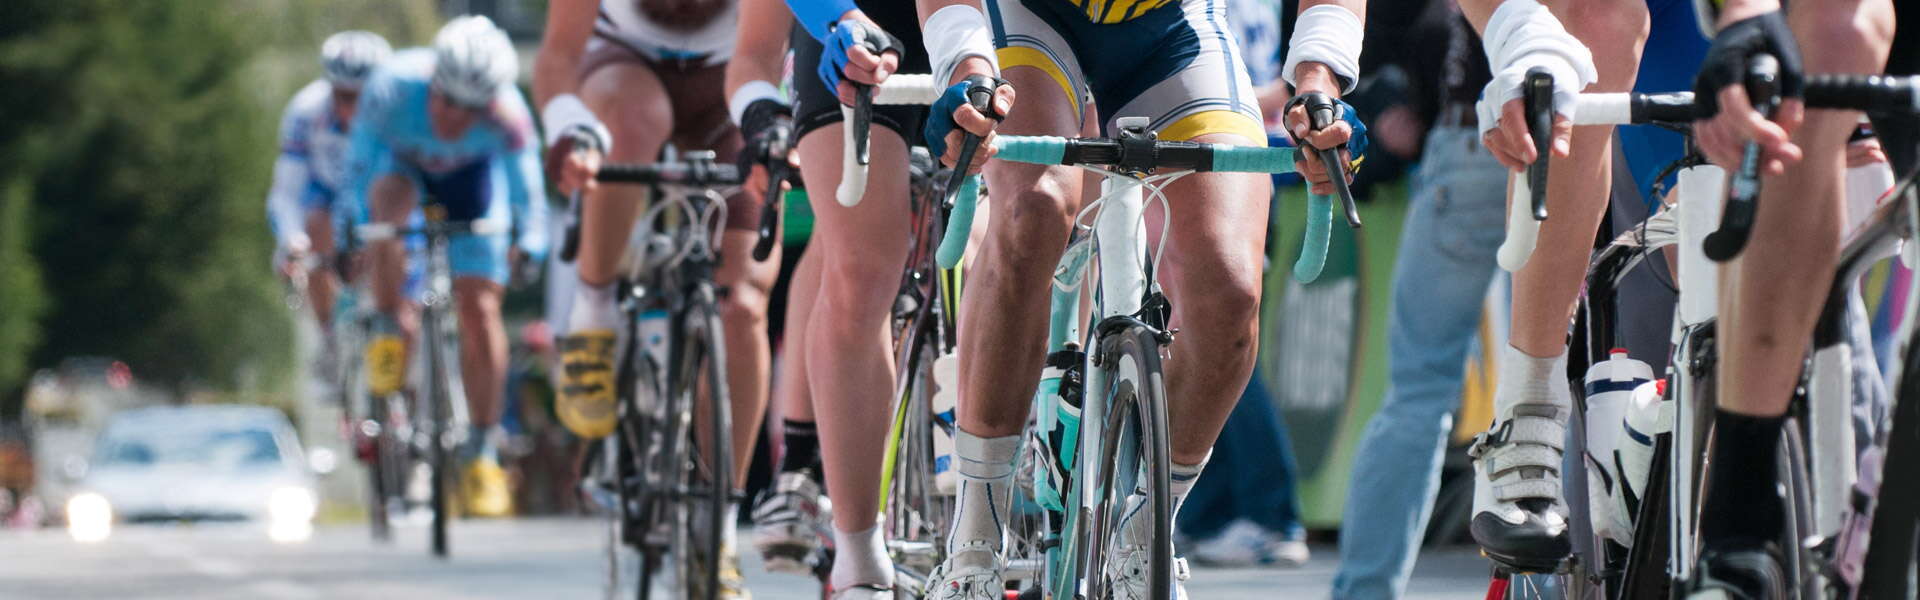 Load management during the competitive cycling season